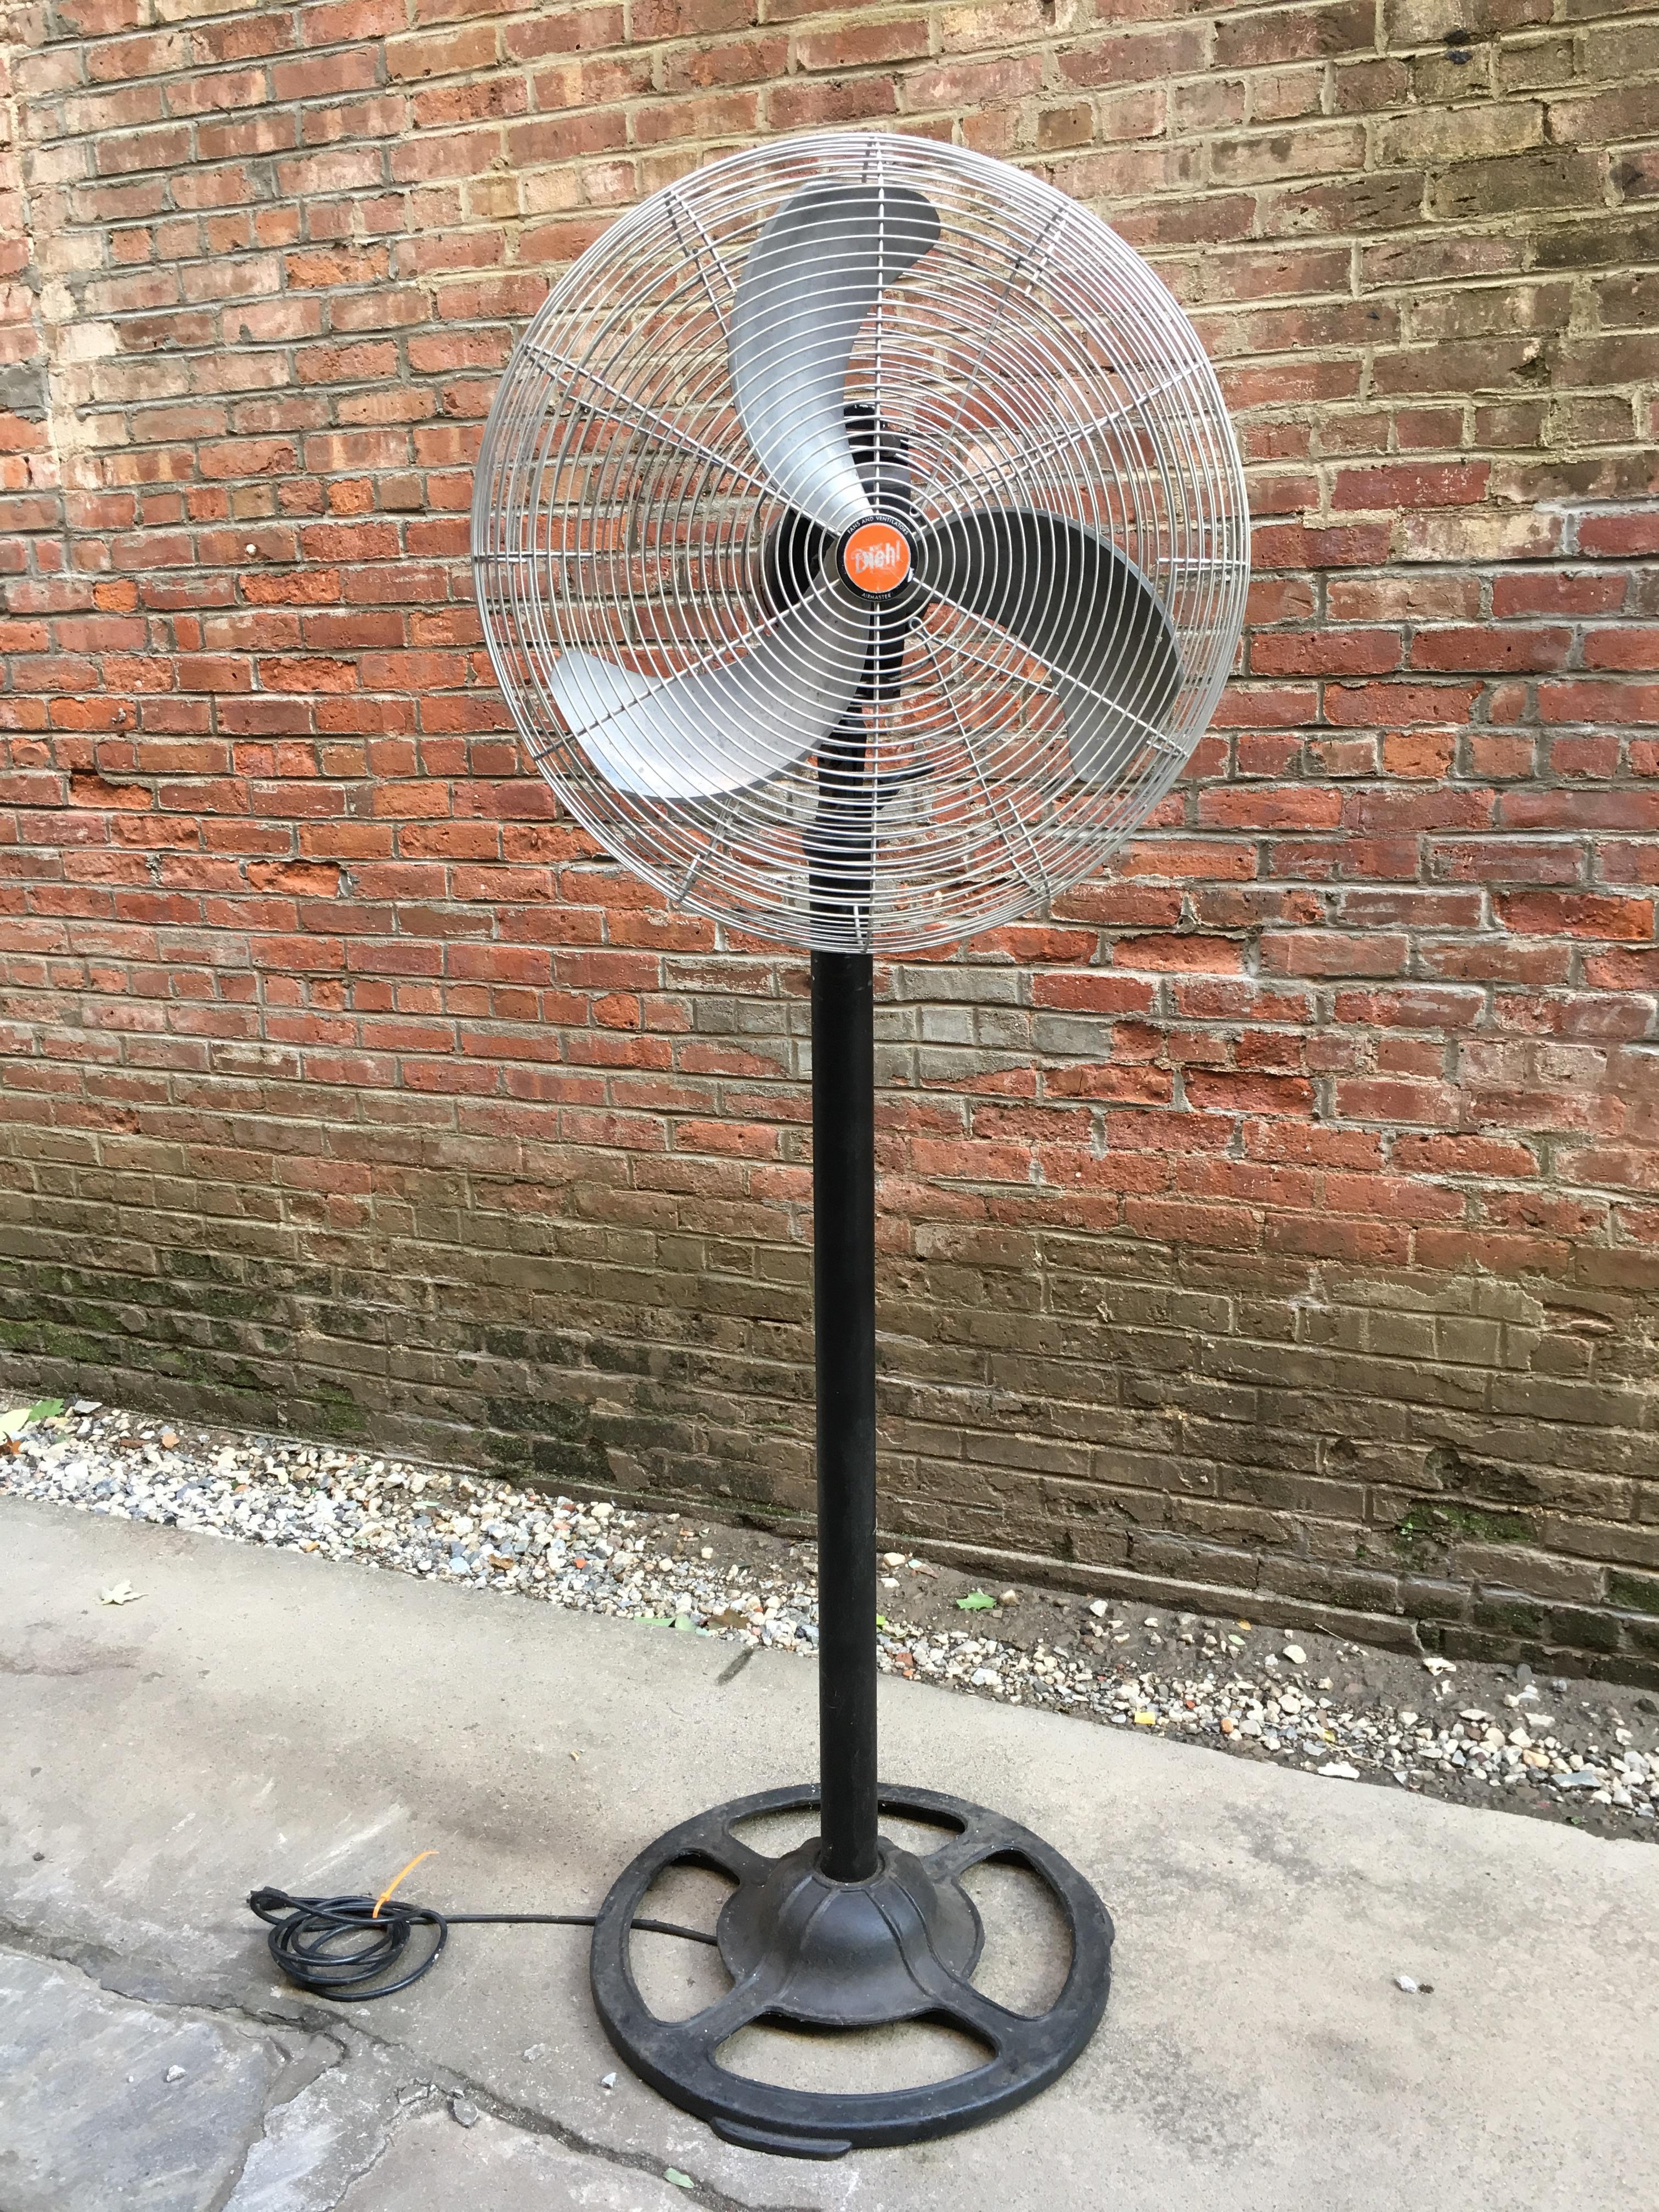 Massive Diehl Airmaster oscillating floor fan. A real work horse fan. This fan purrs, circa 1940-1950. Iron base and shaft. Three blade fan. Fully operational with original wiring.

Measures: 73